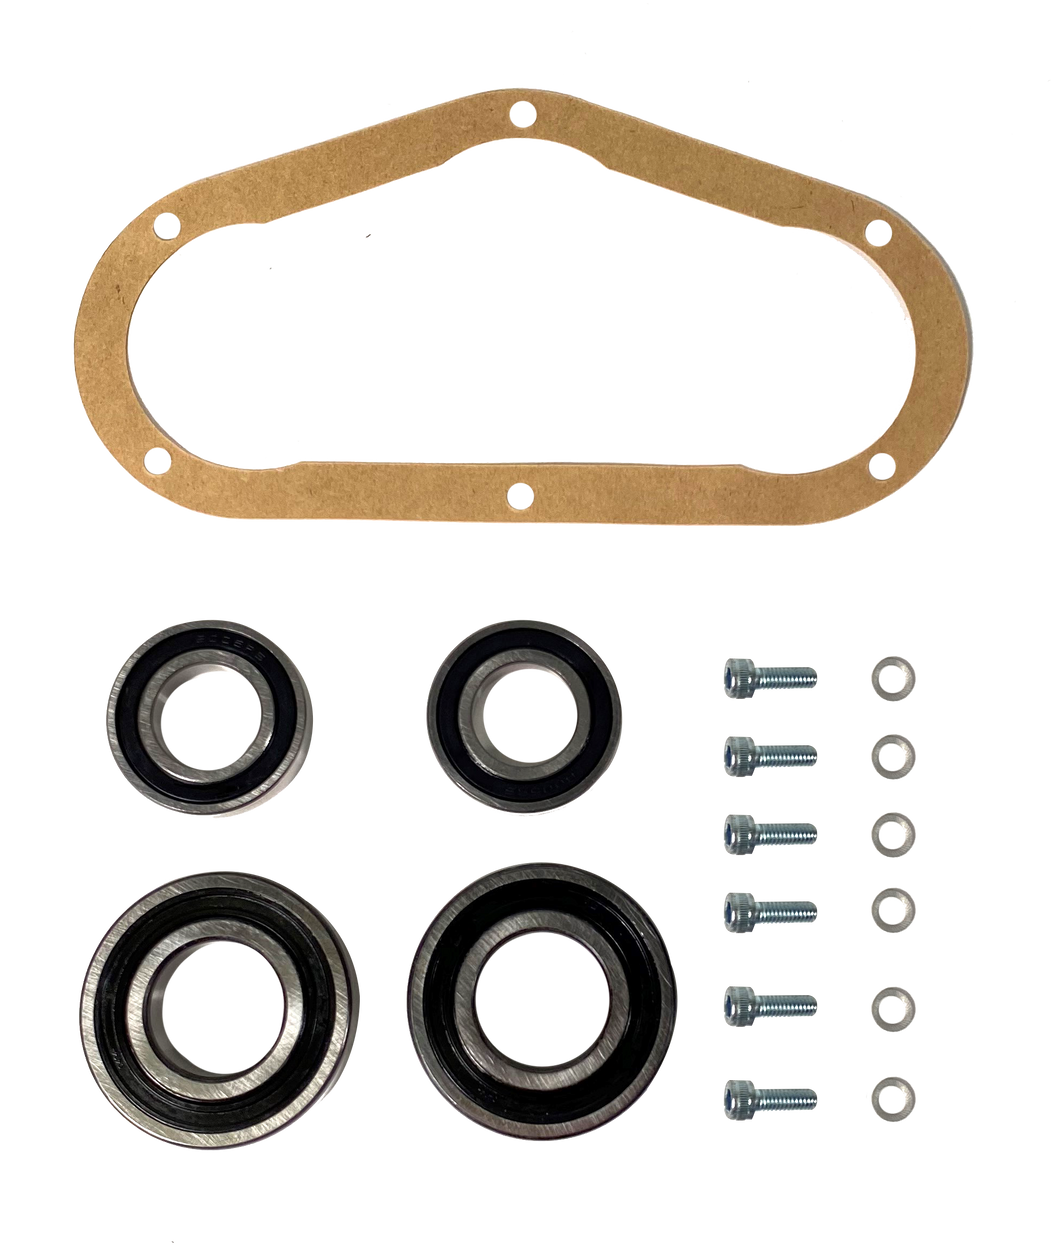 Gigglepin Top Housing Service Kit for GP80